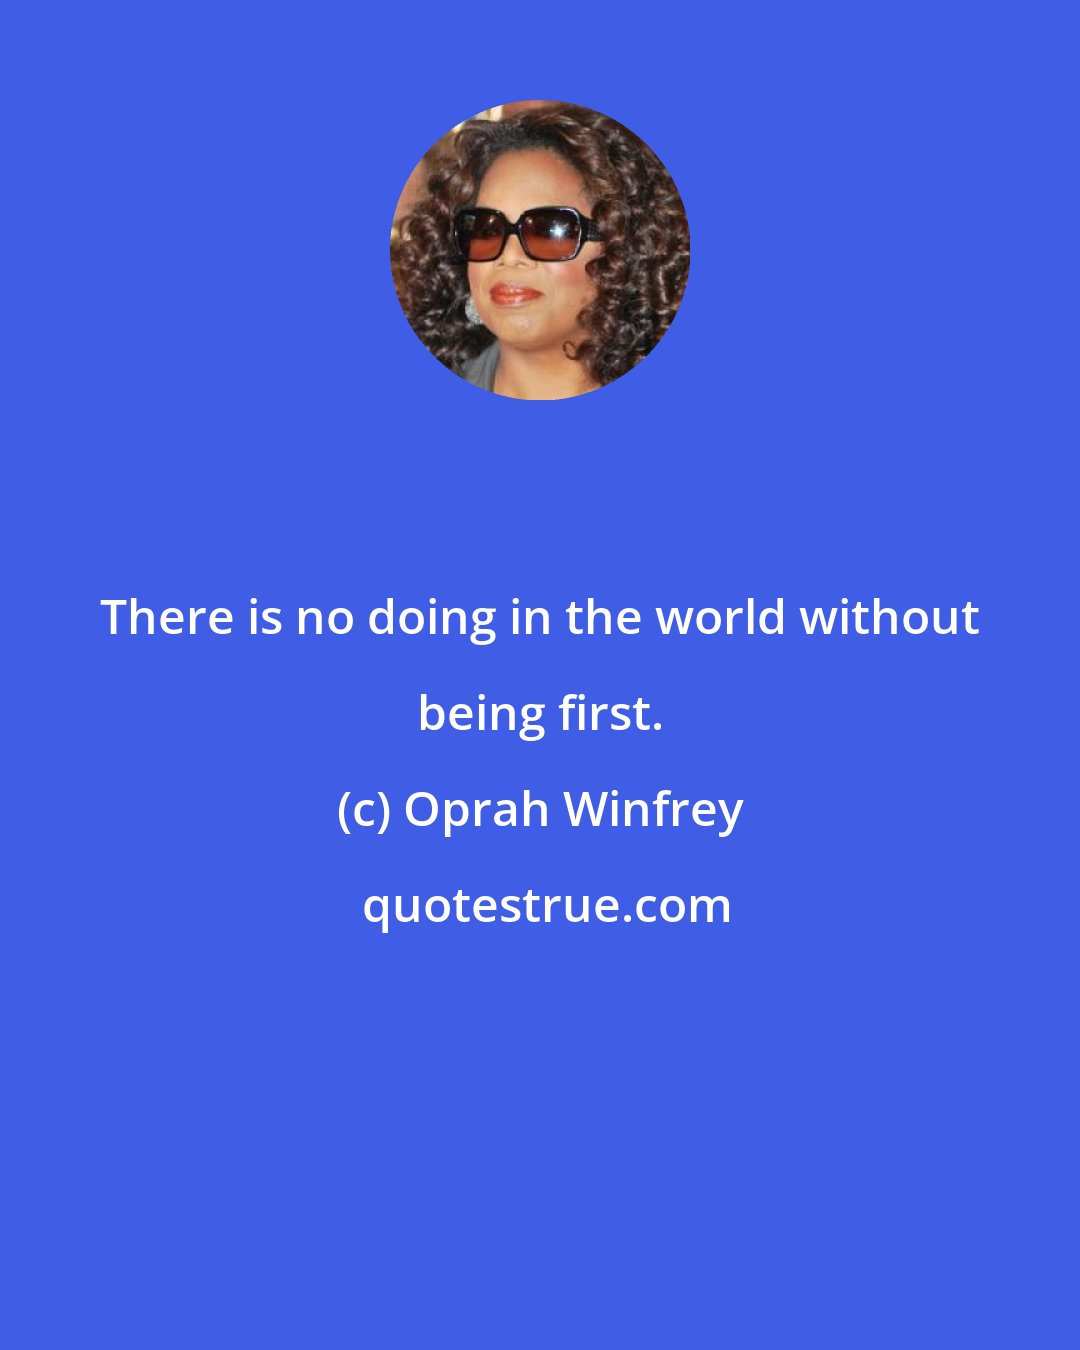 Oprah Winfrey: There is no doing in the world without being first.